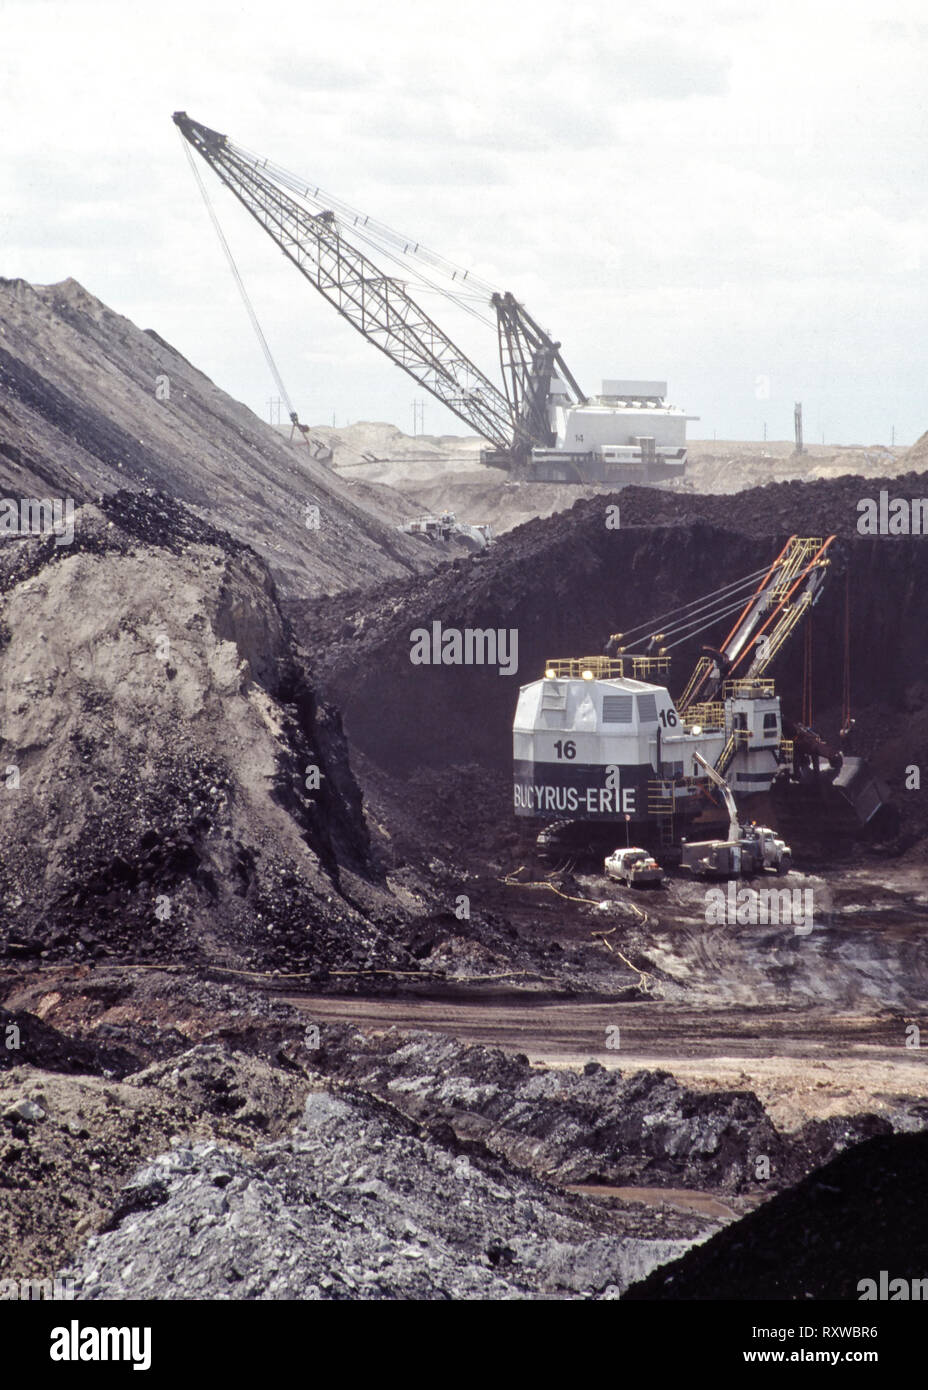 Coal surface mine, Bucyrus Electric Shovel excavating coal seam, shovel working in distance. Stock Photo